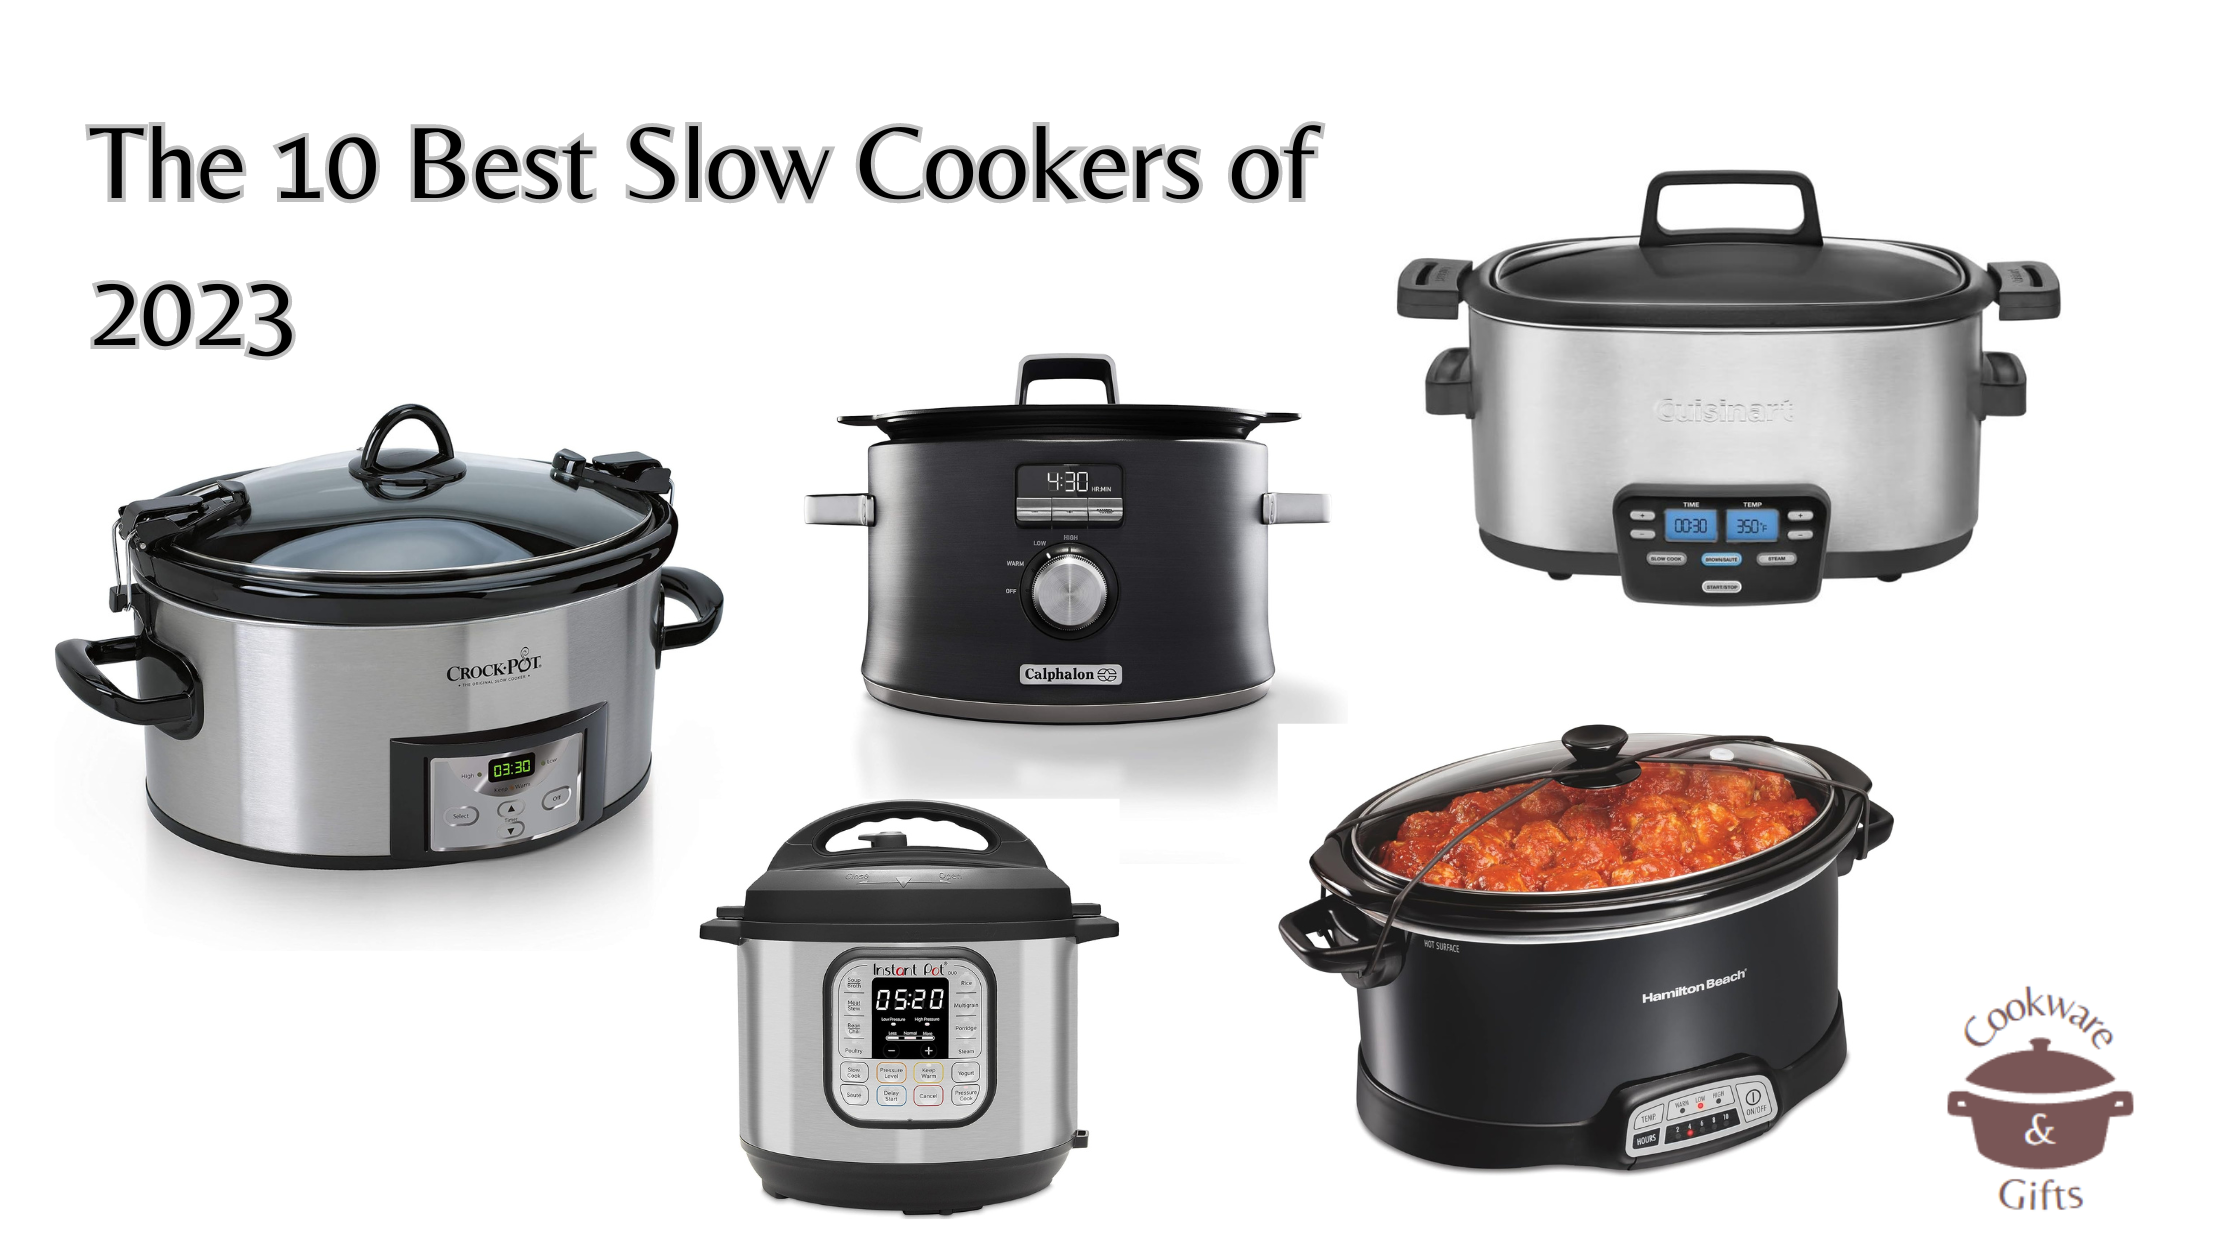 The 10 Best Slow Cookers of 2023: See What Made Our List This Year